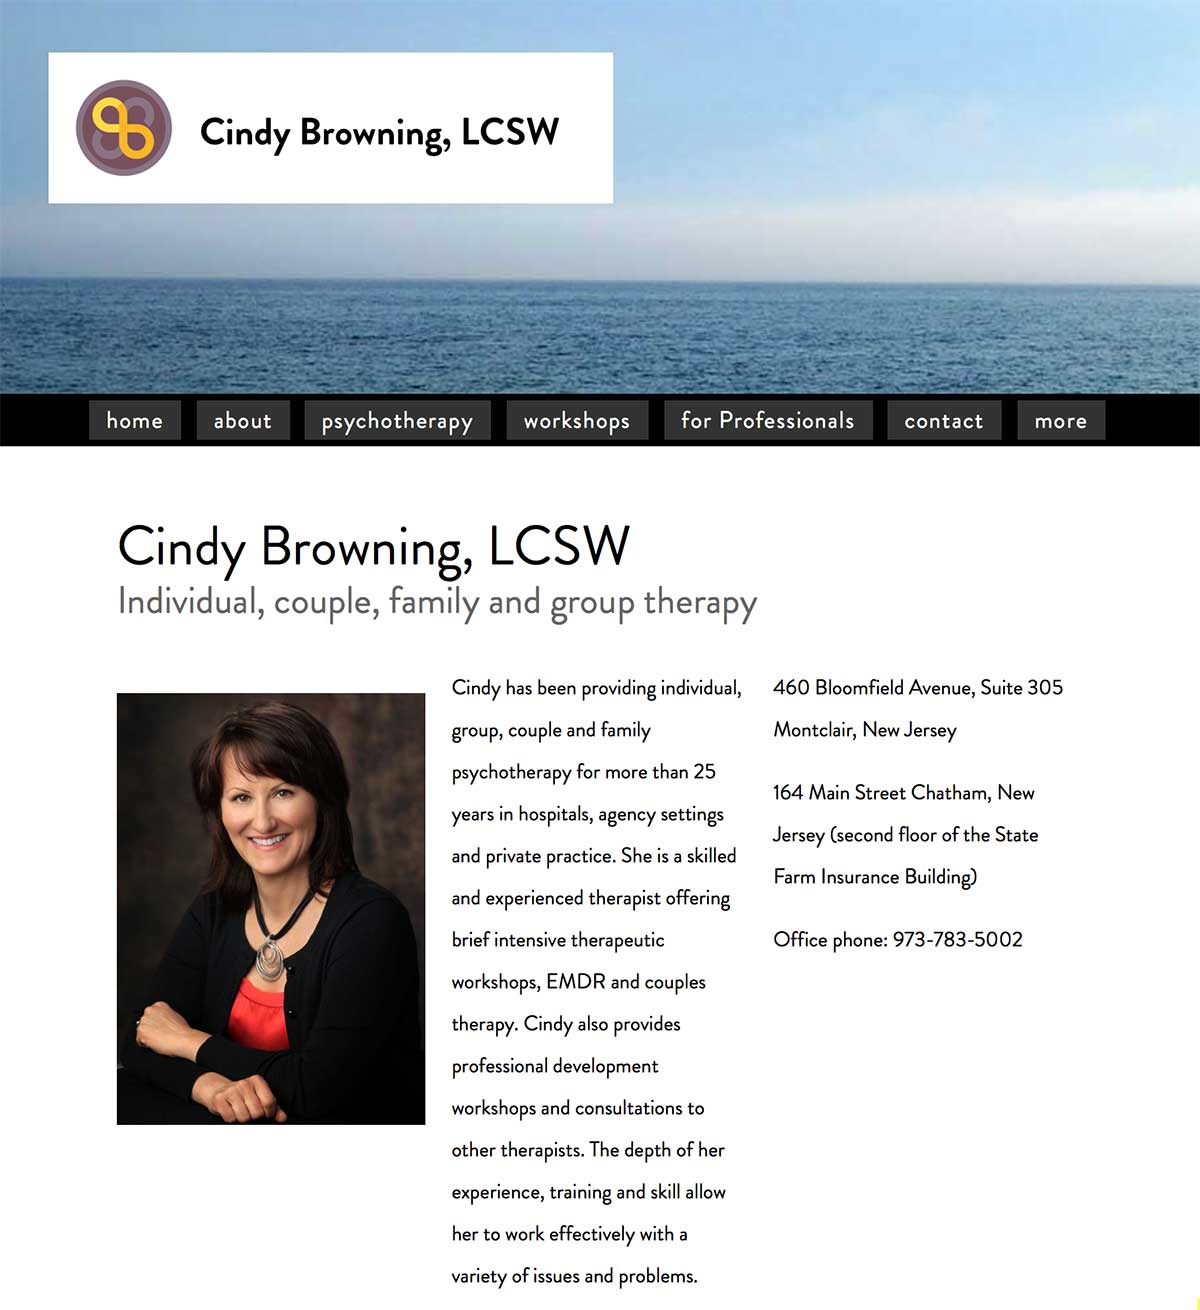 Cindy Browning's website